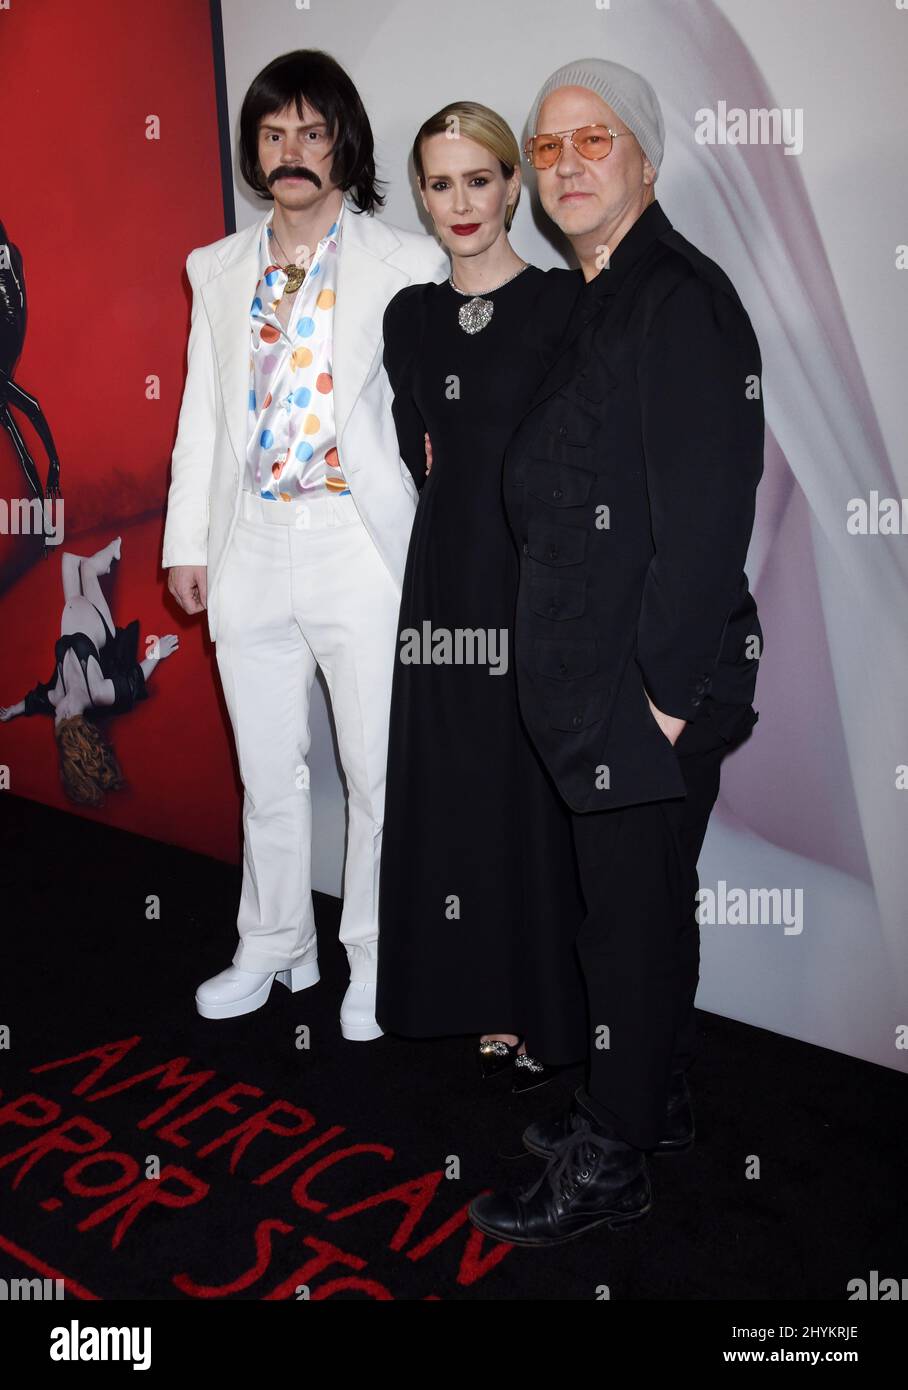 Evan Peters, Sarah Paulson and Ryan Murphy at FX's 'American Horror Story' 100 Episodes Celebration held at the Hollywood Forever Cemetery on October 26, 2019 in Hollywood, USA. Stock Photo